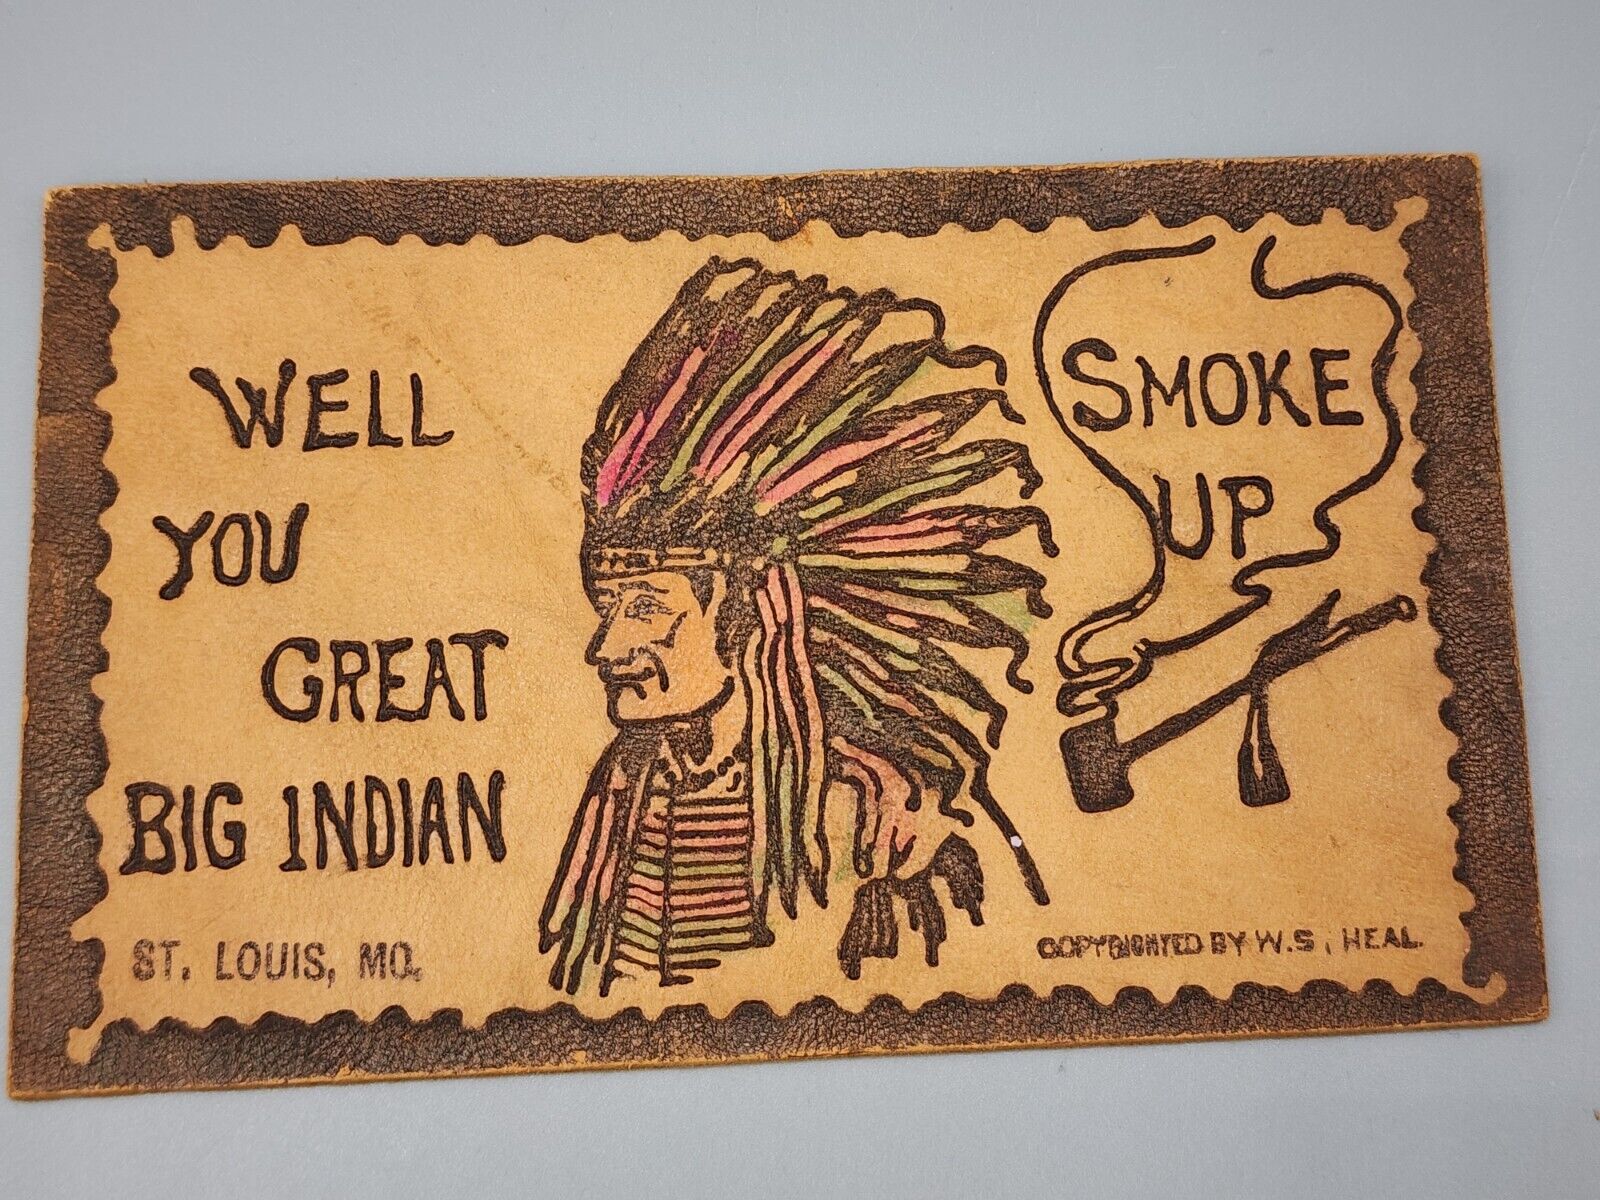 Antique 1906 Well You Great Big Indian Smoke Up Native American Leather Postcard